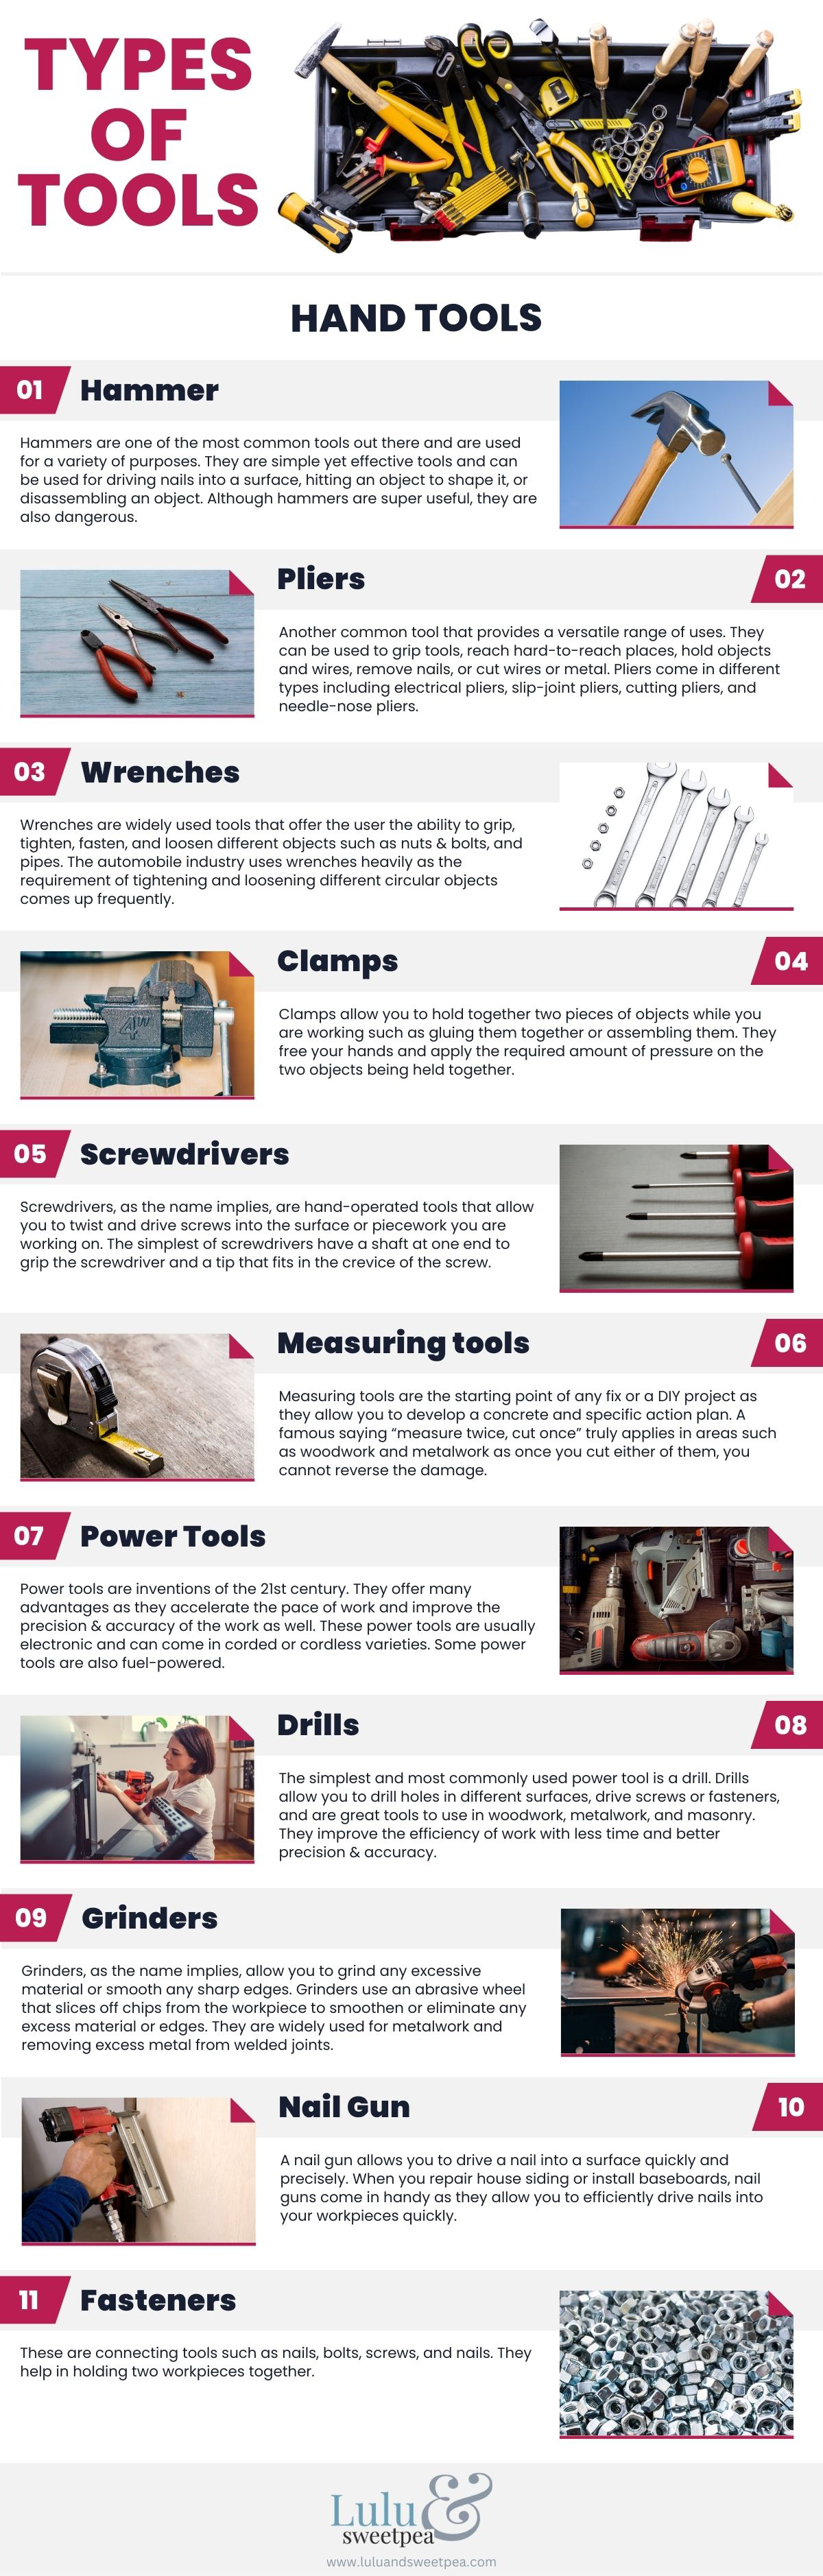 An infographic of the different types of tools